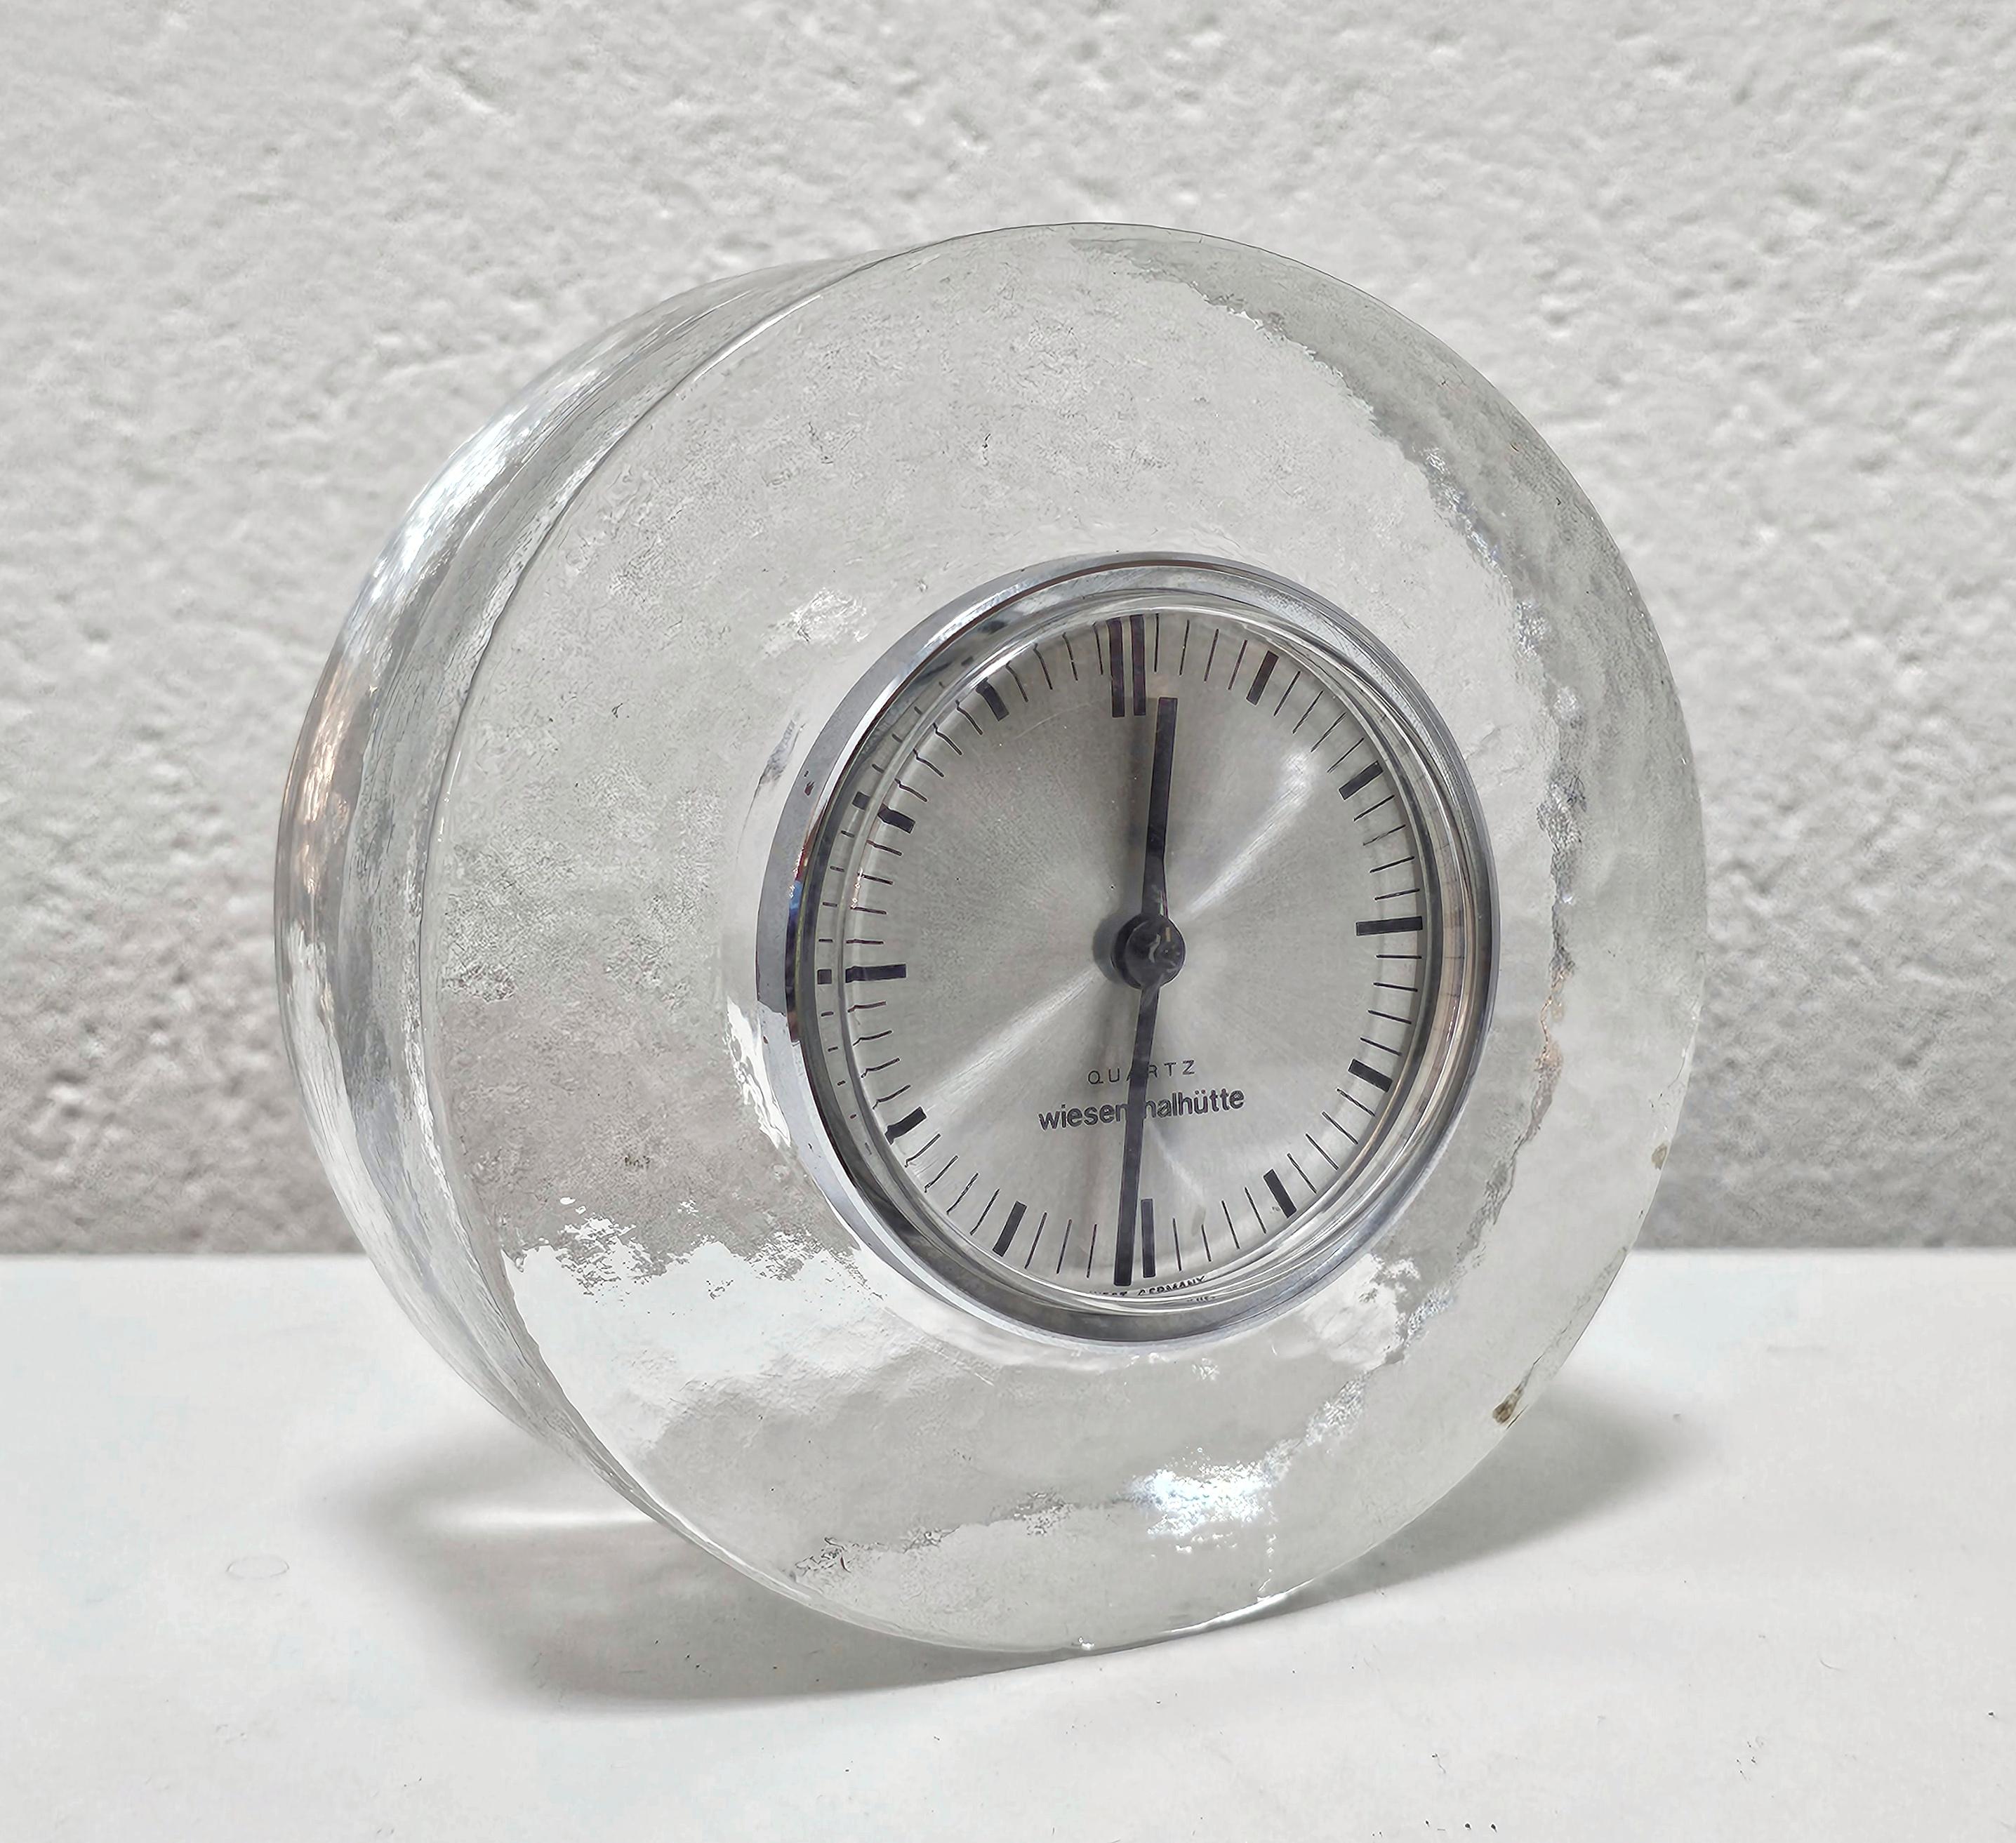 In this listing you will find a gorgeous and extremally rare Mid Century Modern table clock, placed into a massive crystal glass frame. The clock is battery operated. Manufactured by Wiesenthal Hutte. Made in West Germany in 1970s.

Excellent